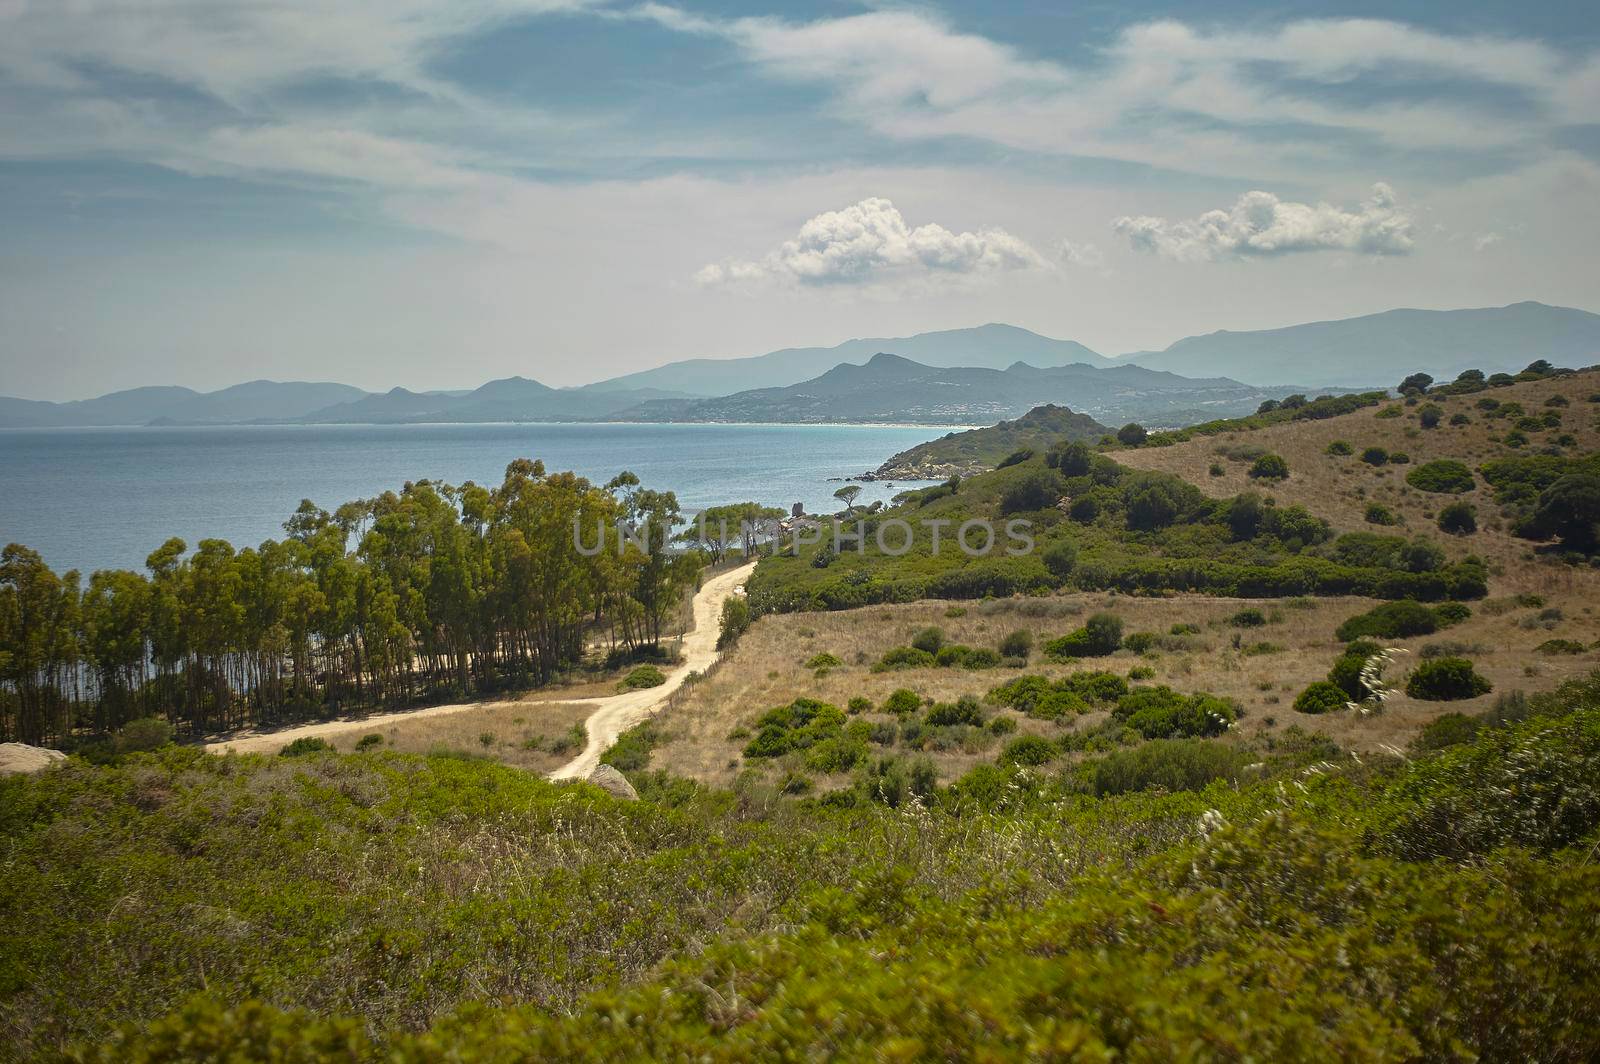 Wonderful panorama containing shrubs and typical Mediterranean vegetation with trees, a dirt road that leads to the sea below with the hills on the horizon.